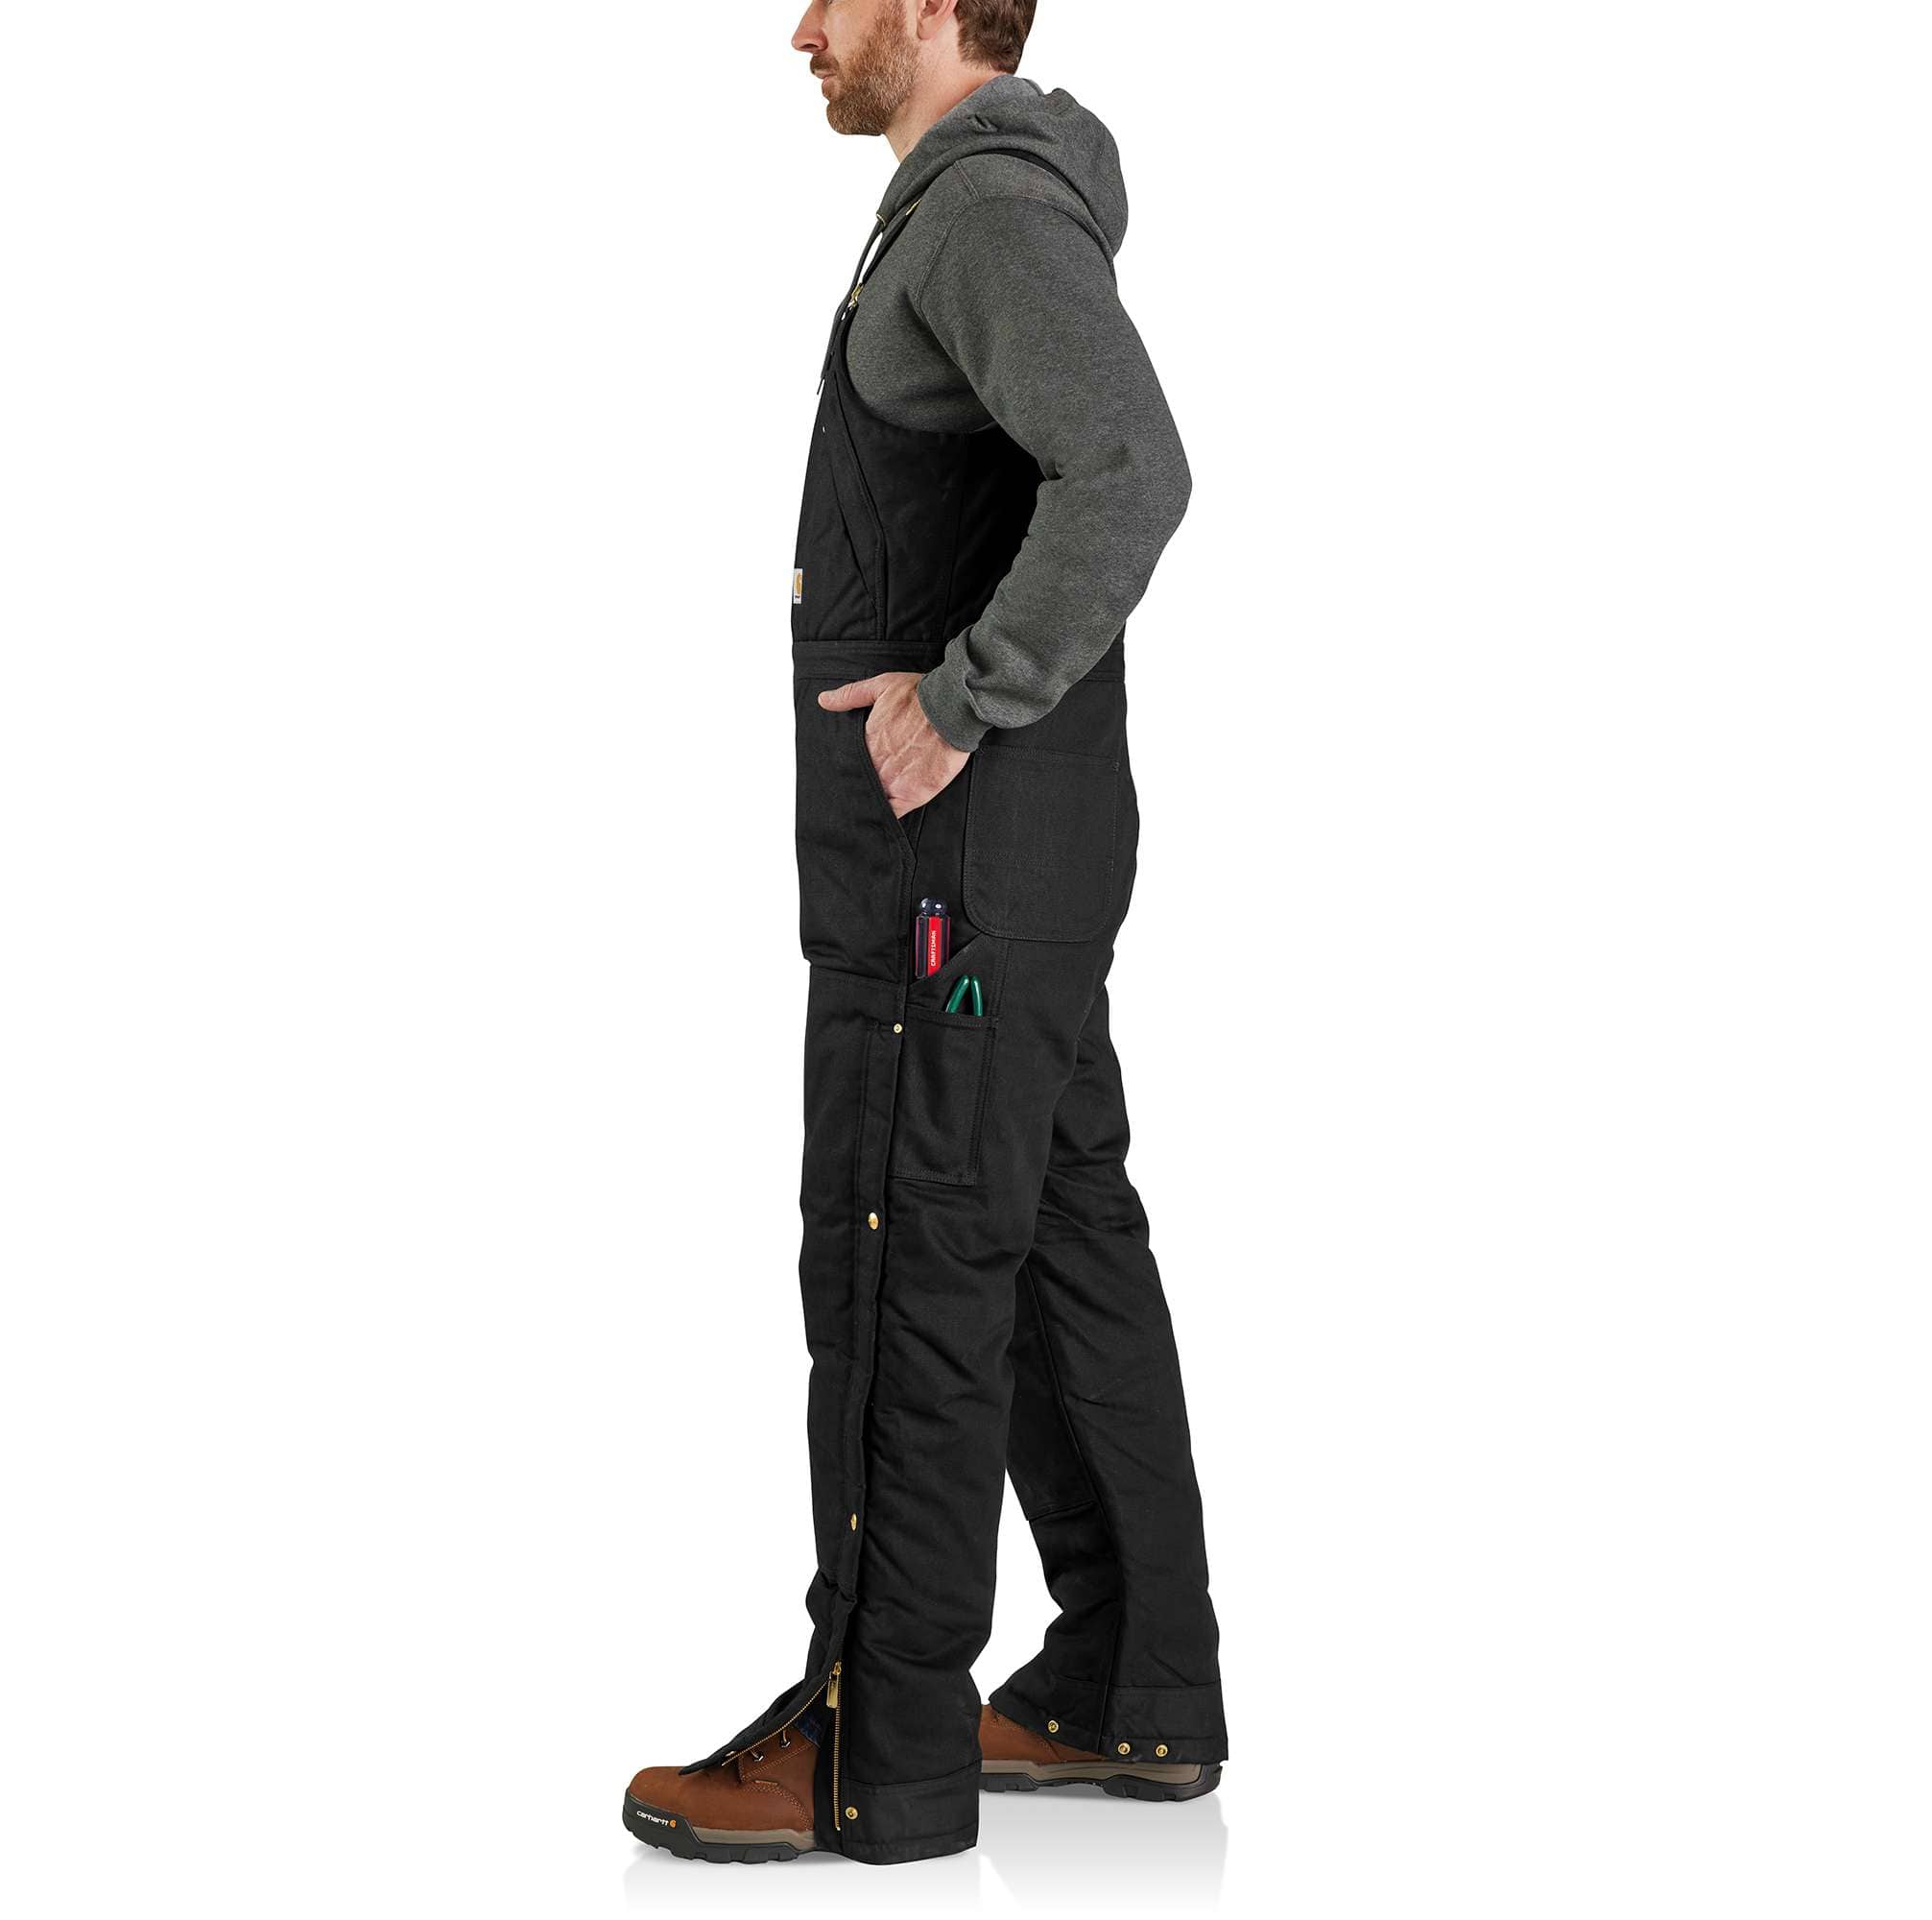 Men's Insulated Bib Overall - Loose Fit Firm Duck 4 Extreme Warmth Rating